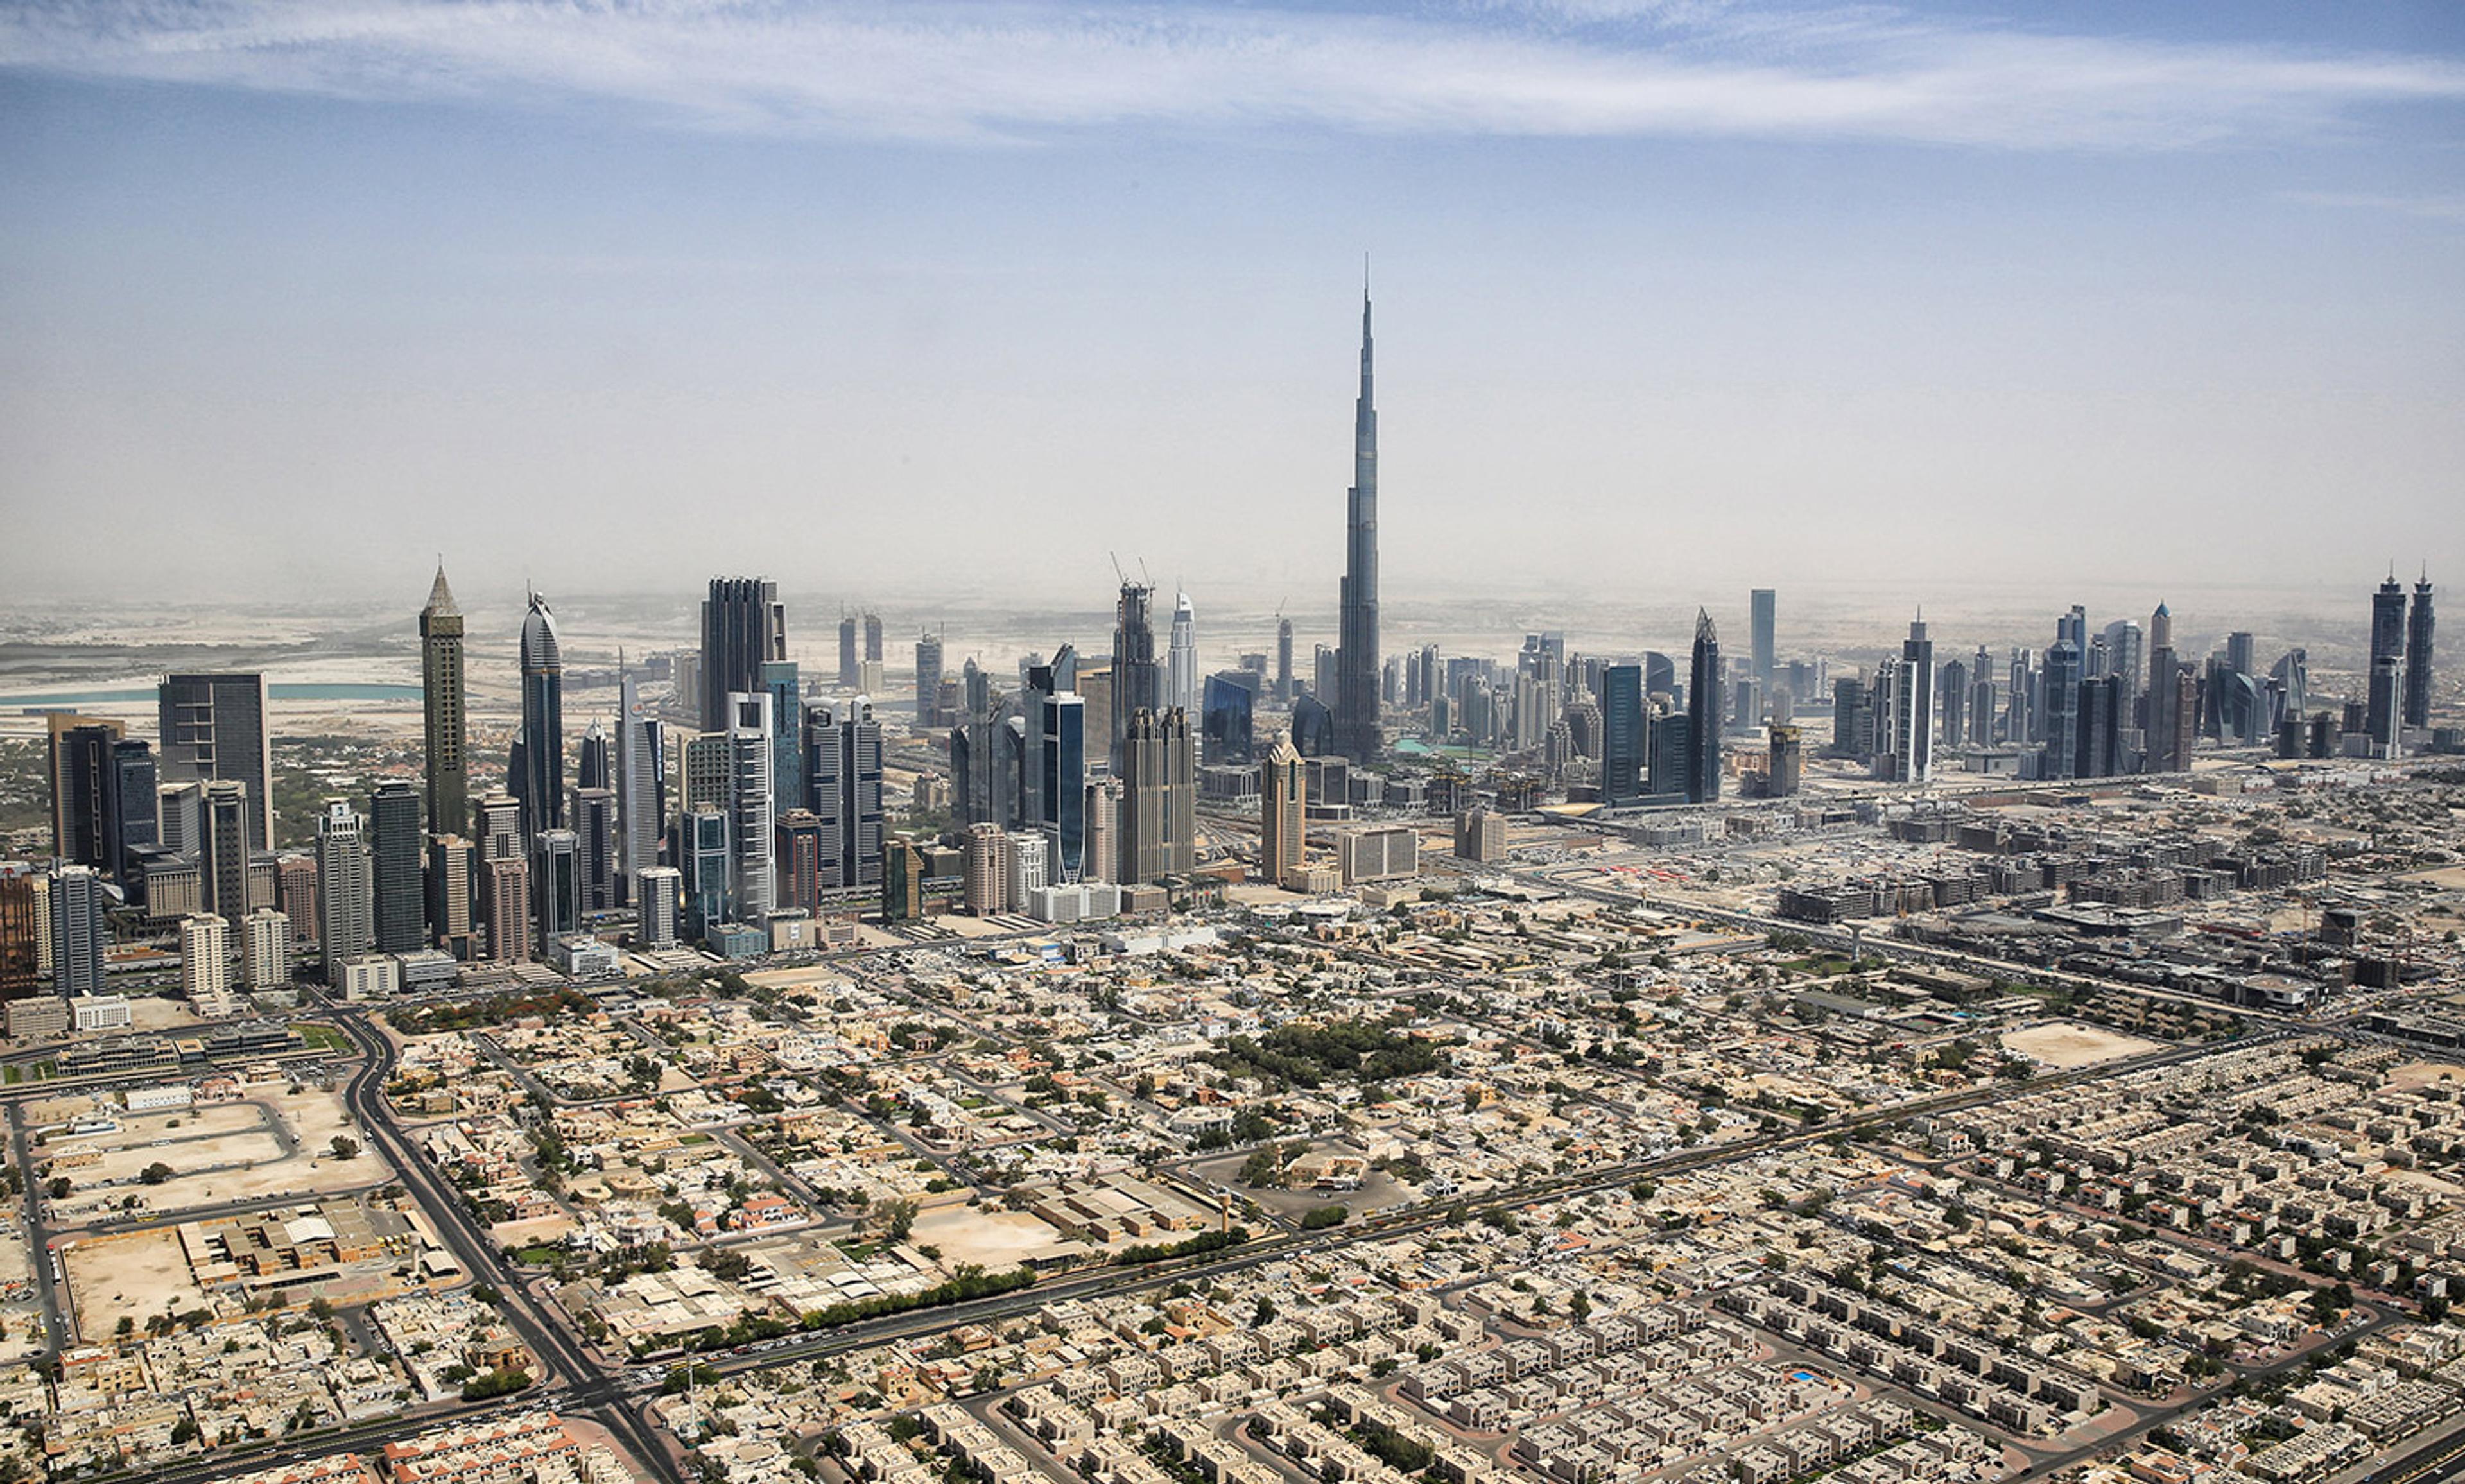 <p>The Dubai skyline featuring the Burj Khalifa (centre) in 2015. <em>Photo Tim Reckmann/Flickr </em><a href="https://creativecommons.org/licenses/by/2.0/" rel="noreferrer noopener" target="_blank">CC BY 2.0</a></p>